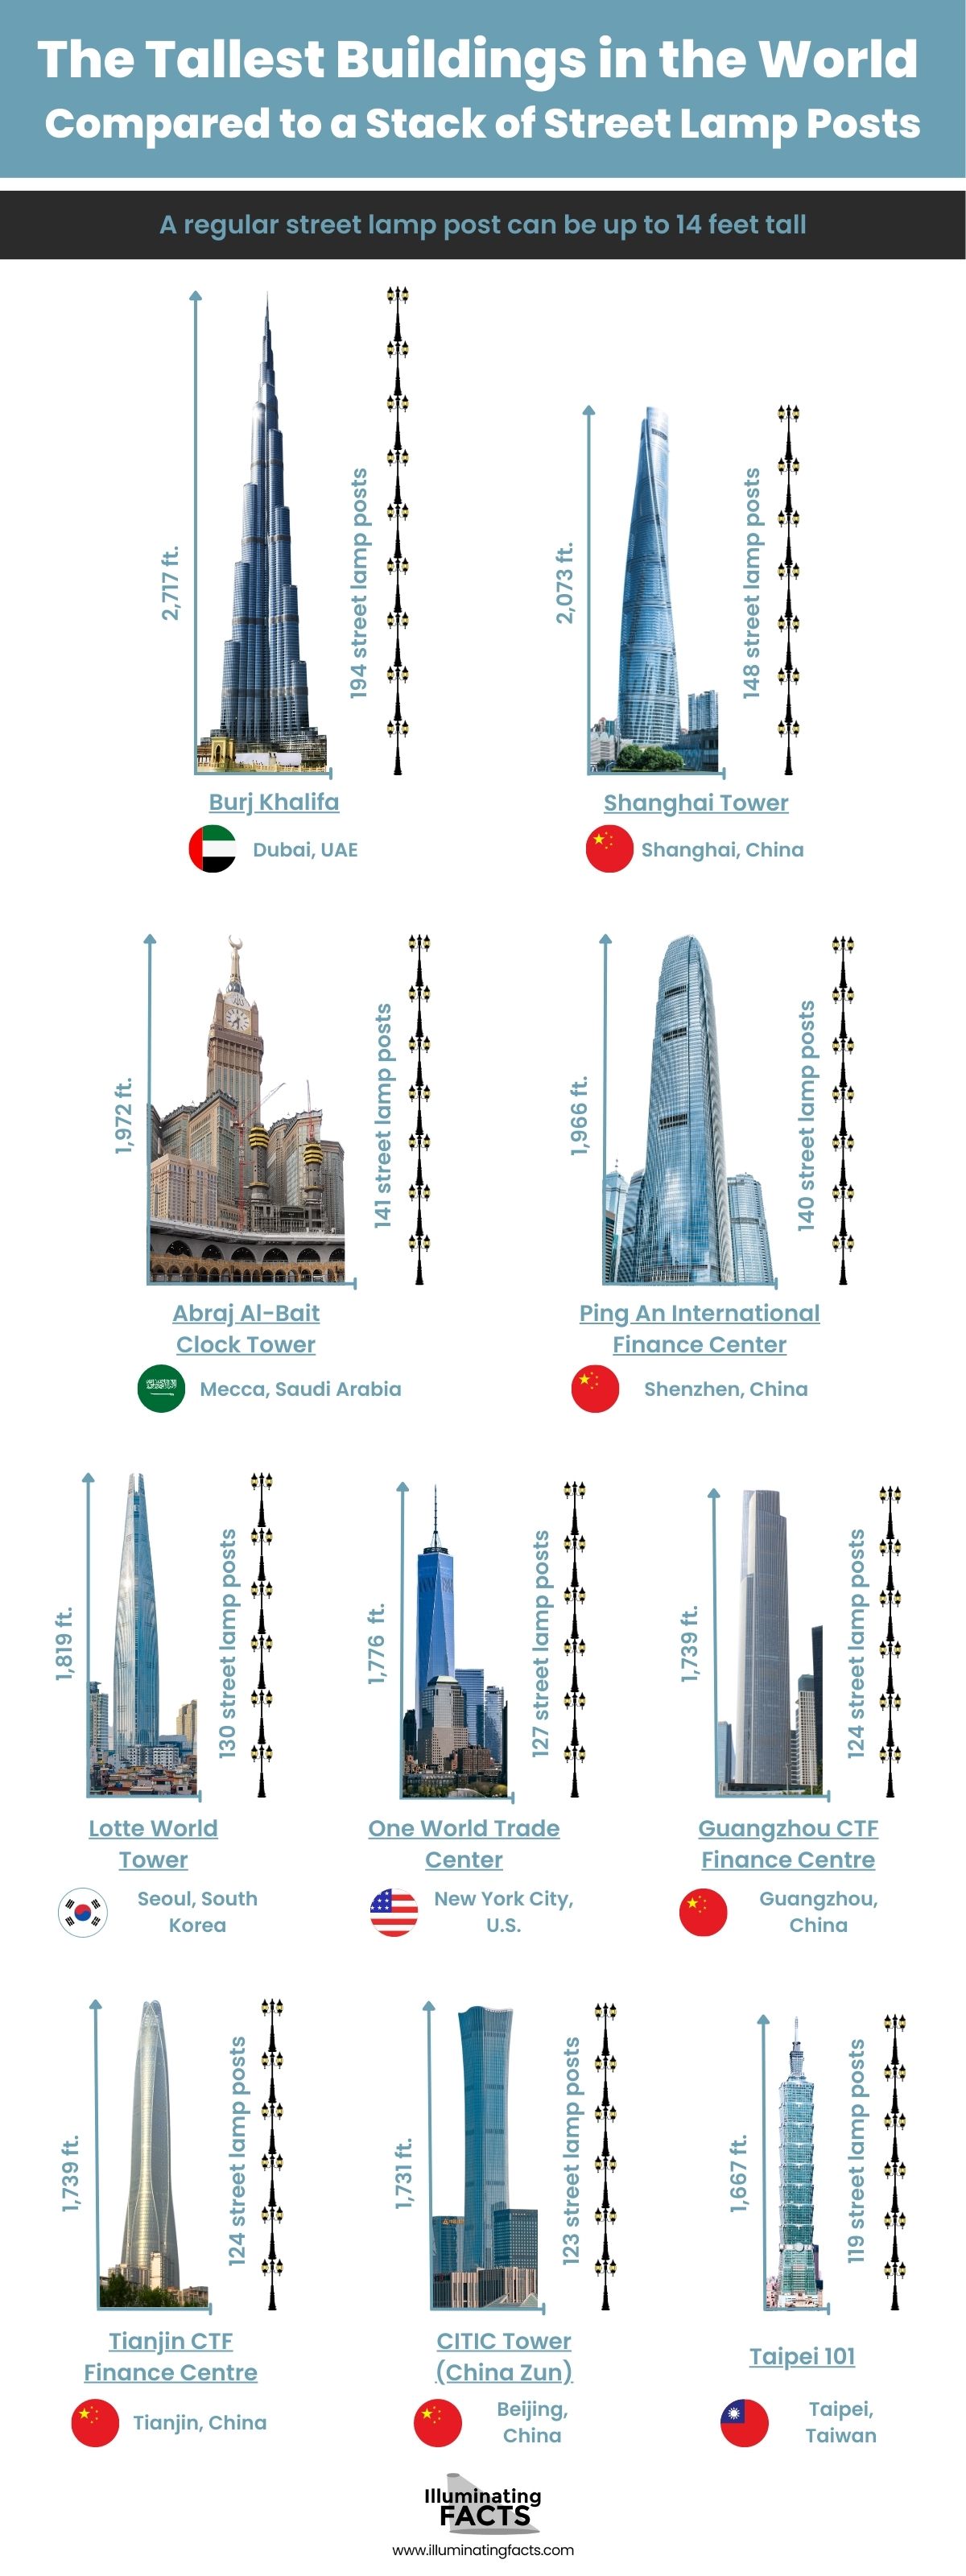 The Tallest Buildings in the World Compared to Street Lamp Posts